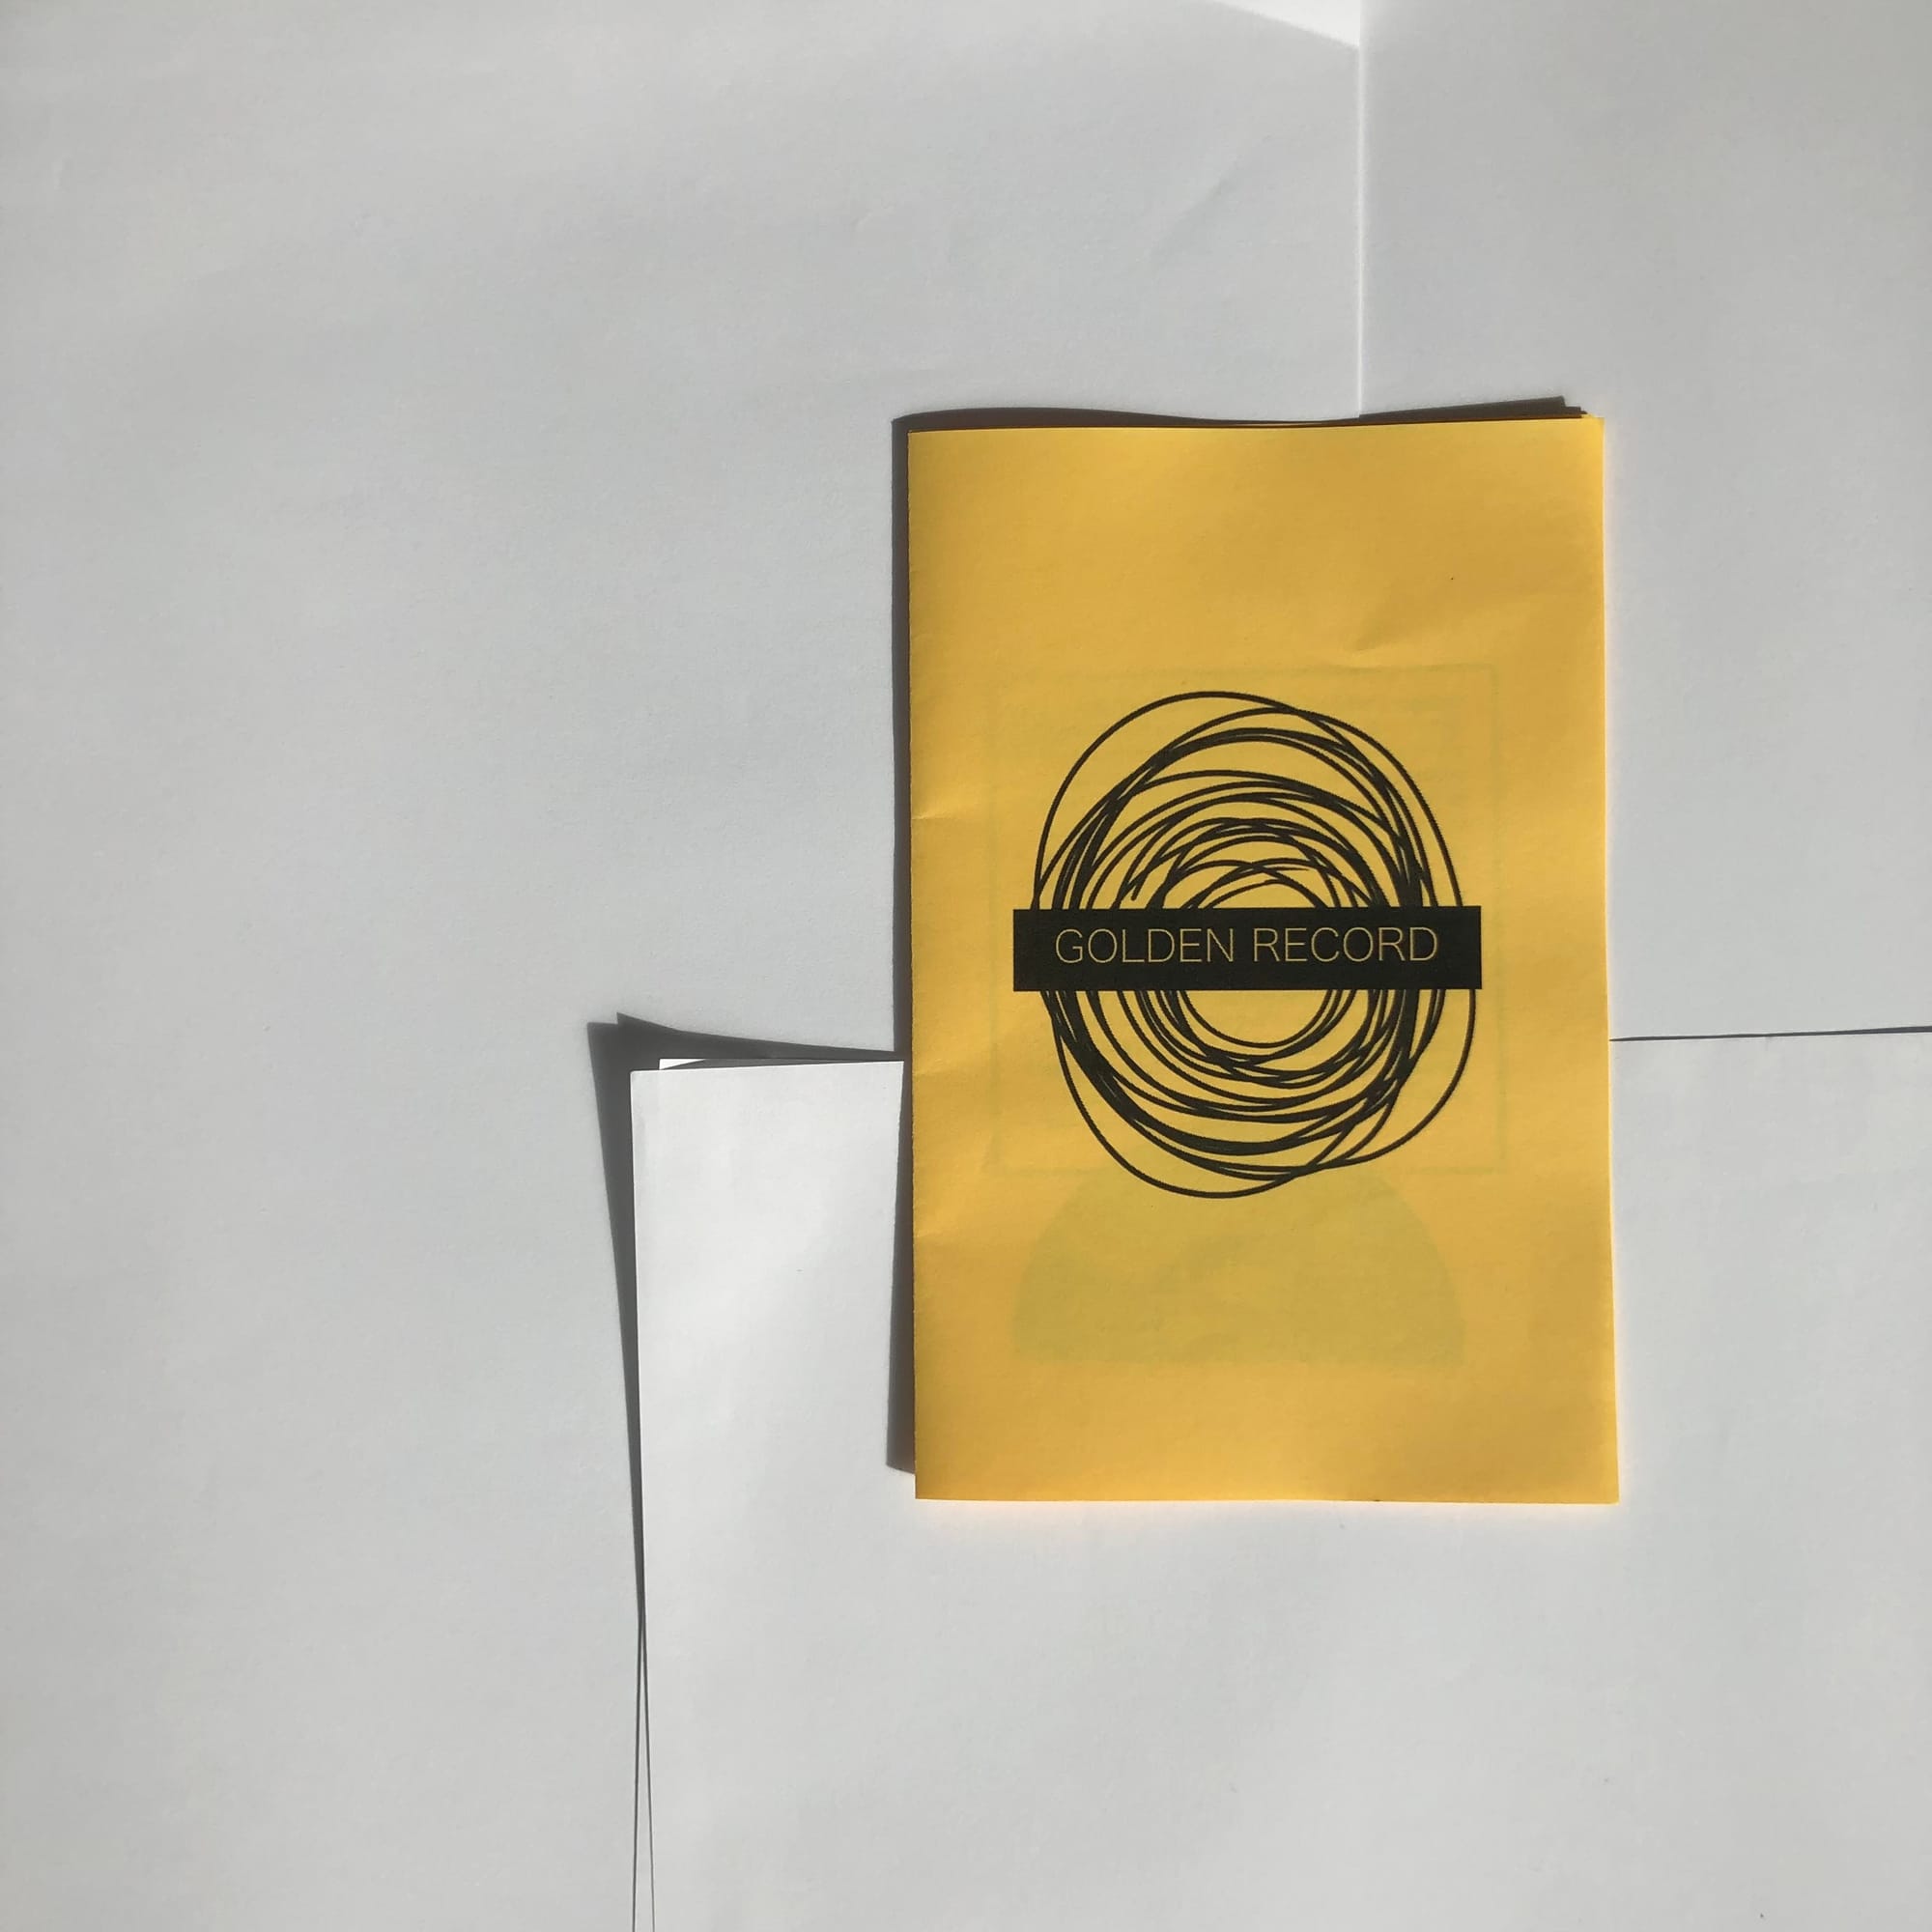 goldenrod coloured folded paper zine printed with black ink. the cover is a circular swirl of lines and the title "Golden Record"